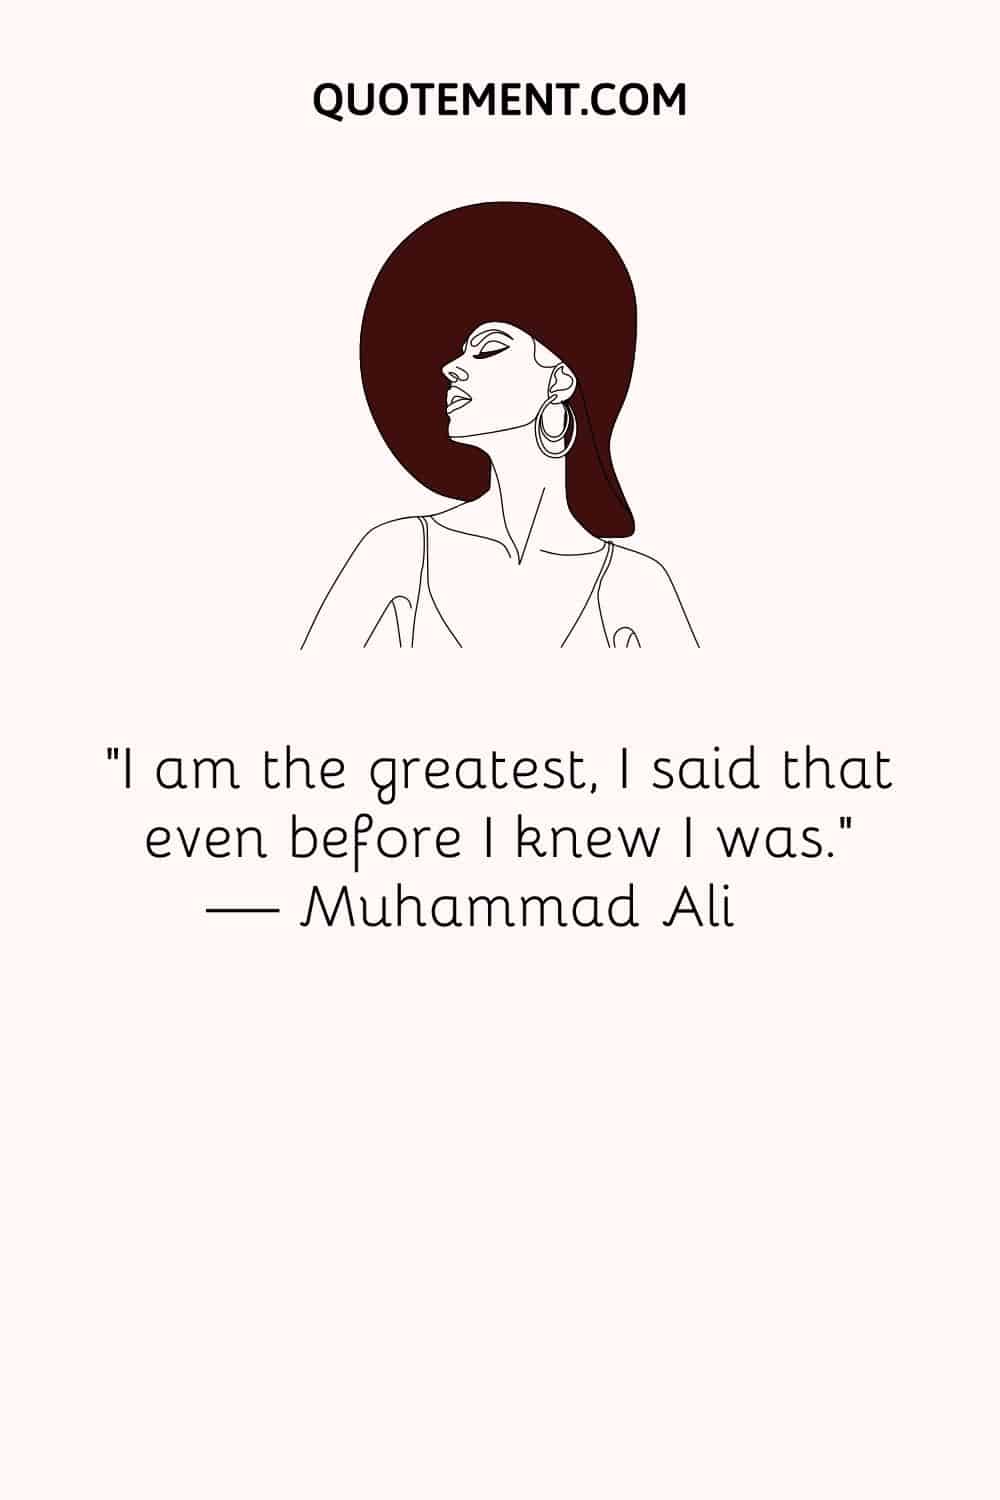 “I am the greatest, I said that even before I knew I was.” — Muhammad Ali